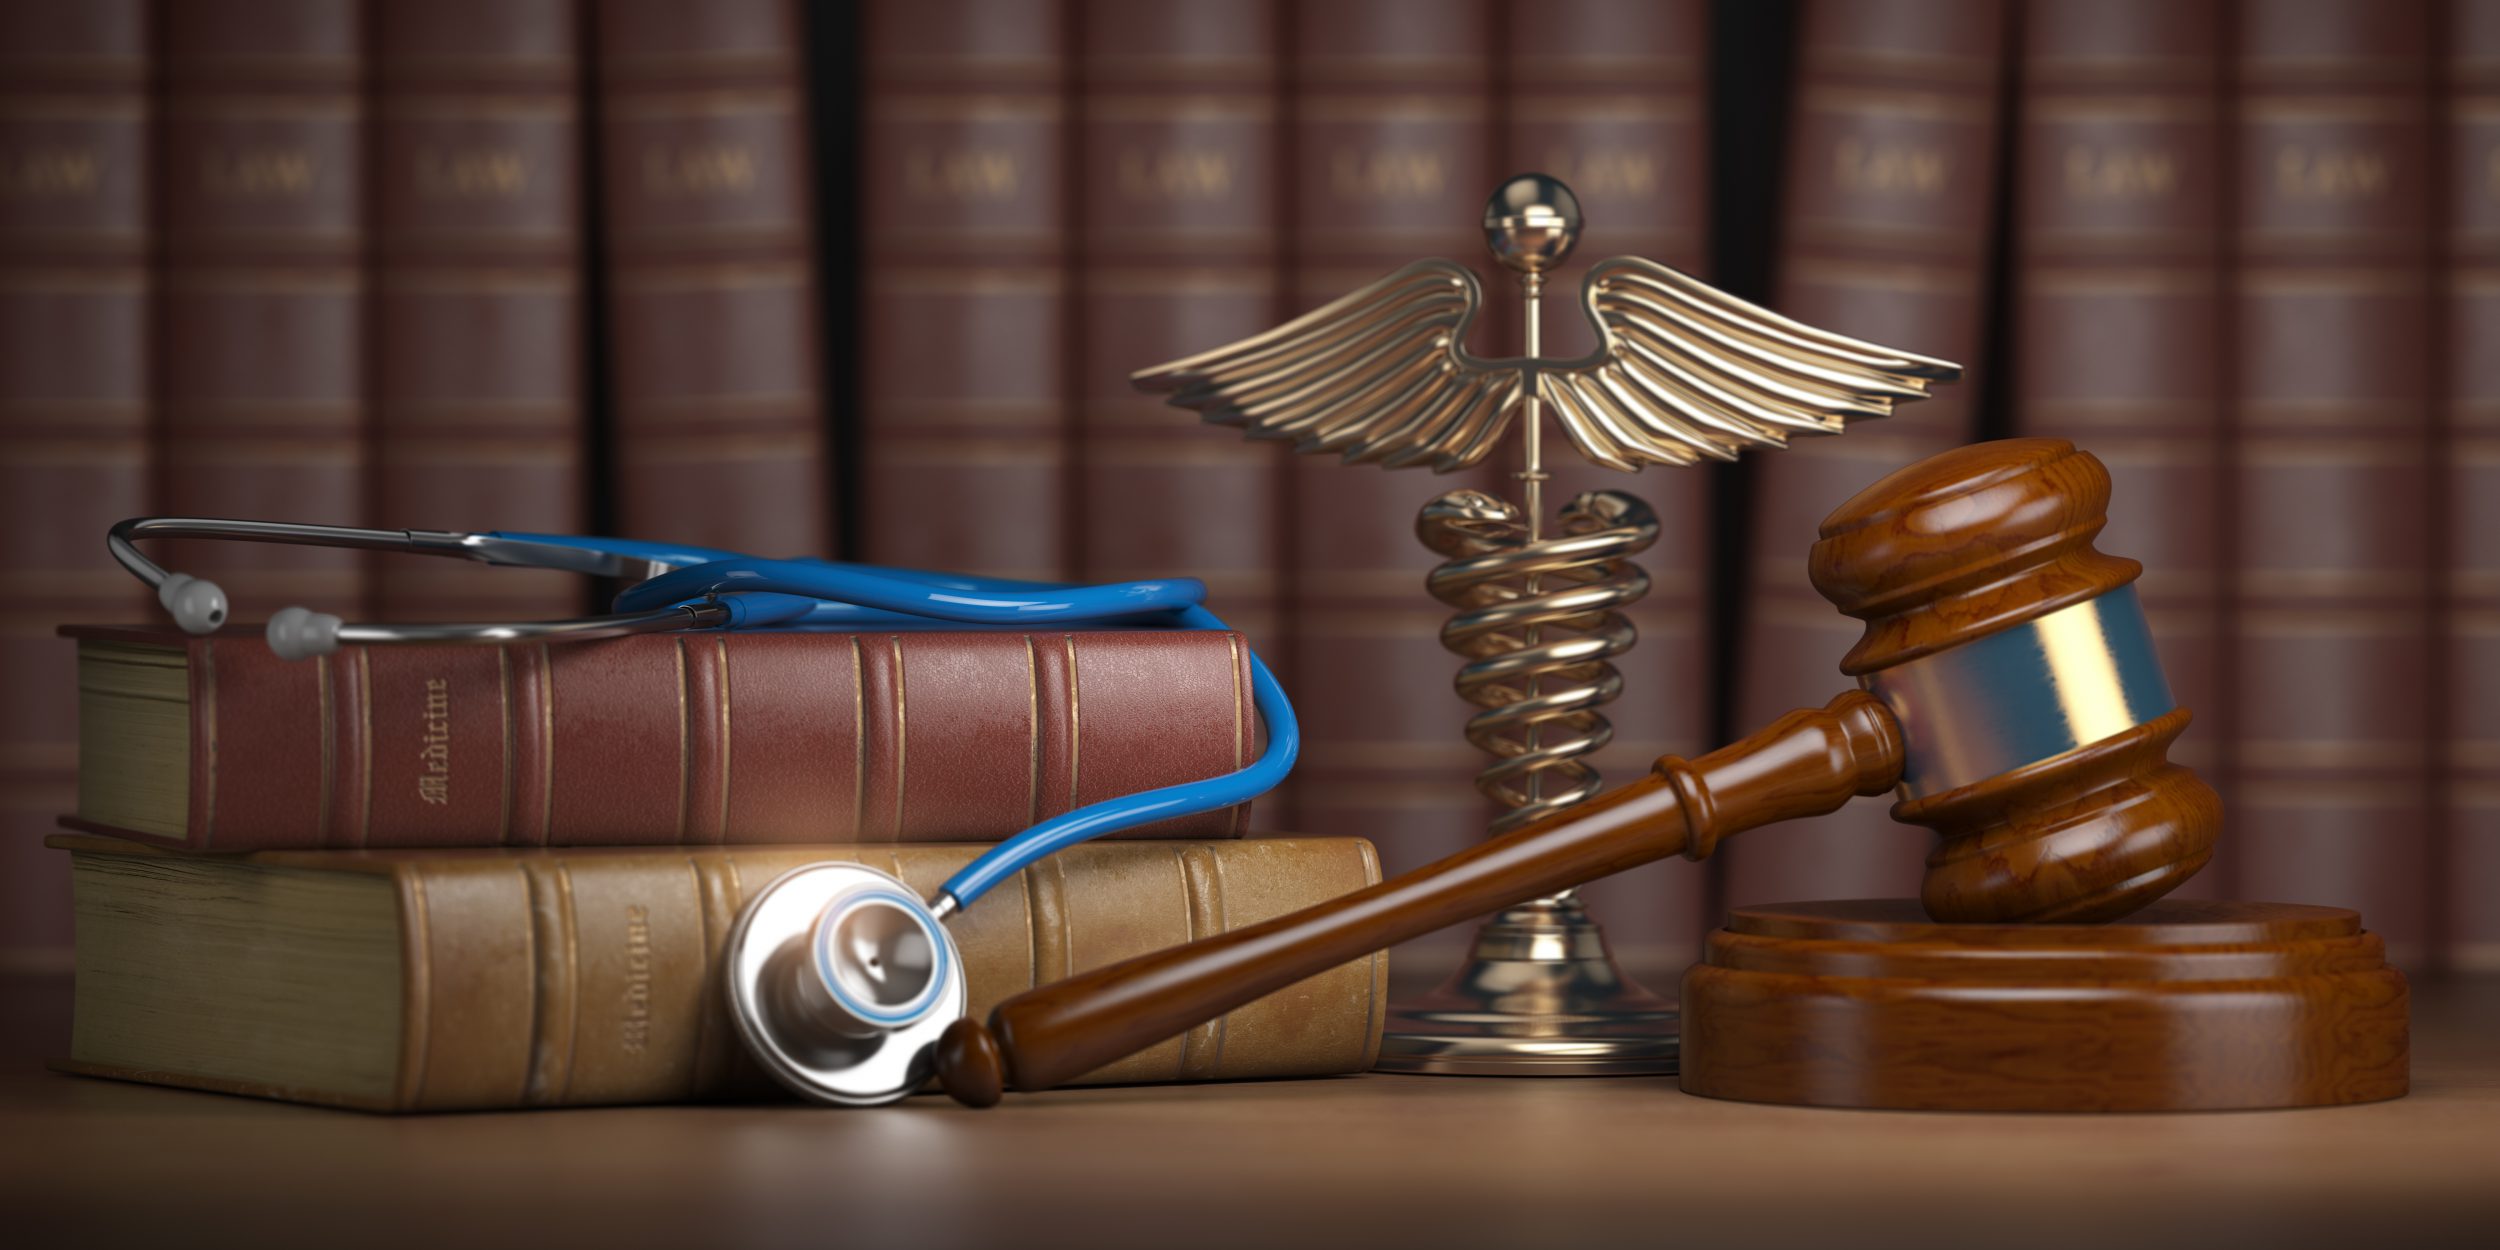 Gavel, stethoscope and caduceus sign on books background on who enforces HIPAA